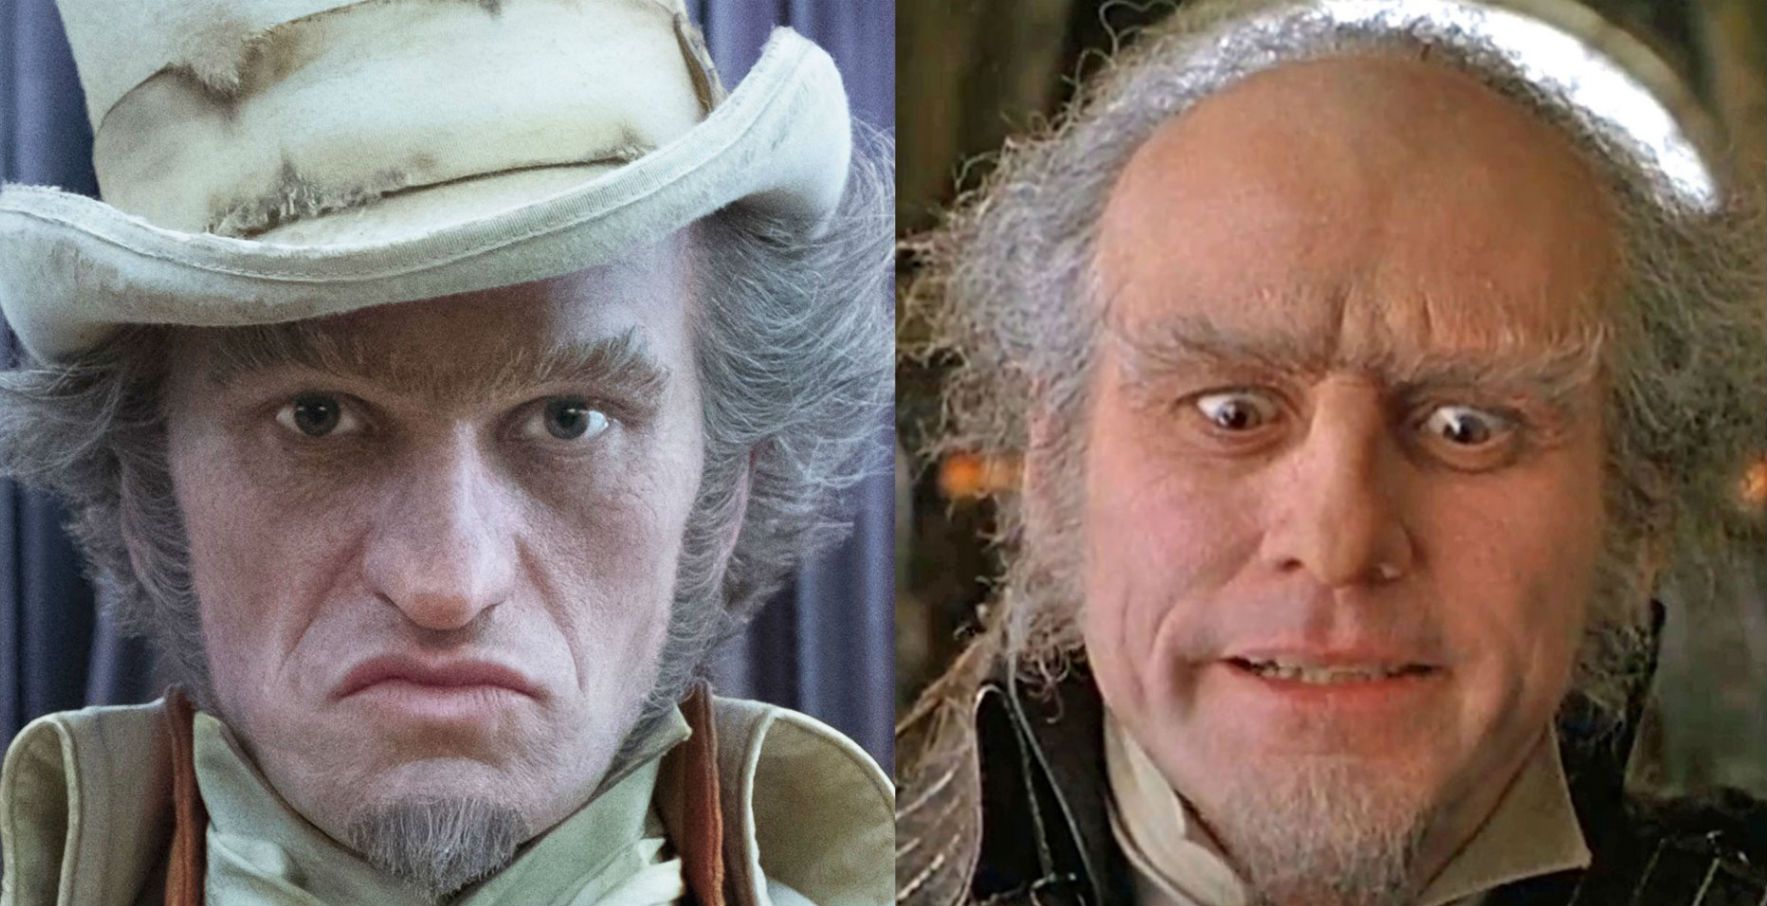 Olaf VS Olaf: A Comparison Of Neil Patrick Harris' Version Of Count Olaf To  Jim Carrey's